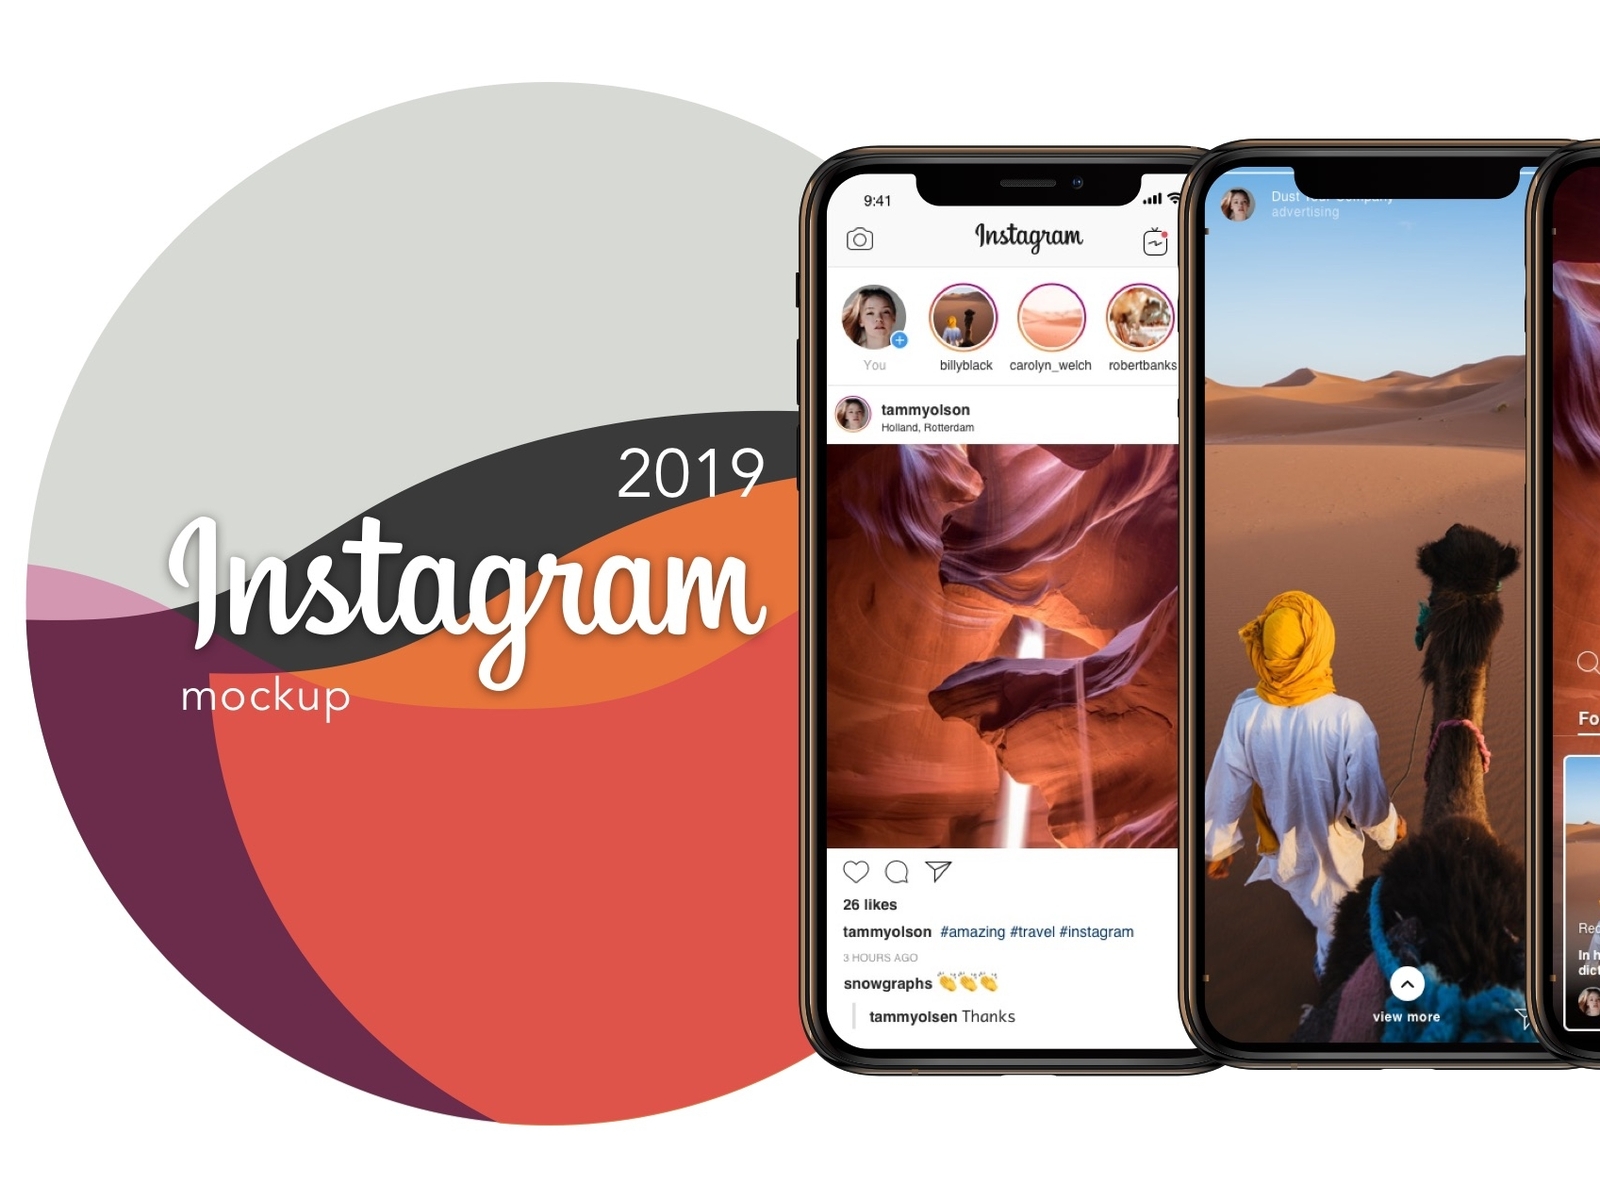 Instagram Mockup Template 2019 Psd Sketch Free Download By Clone Kitty